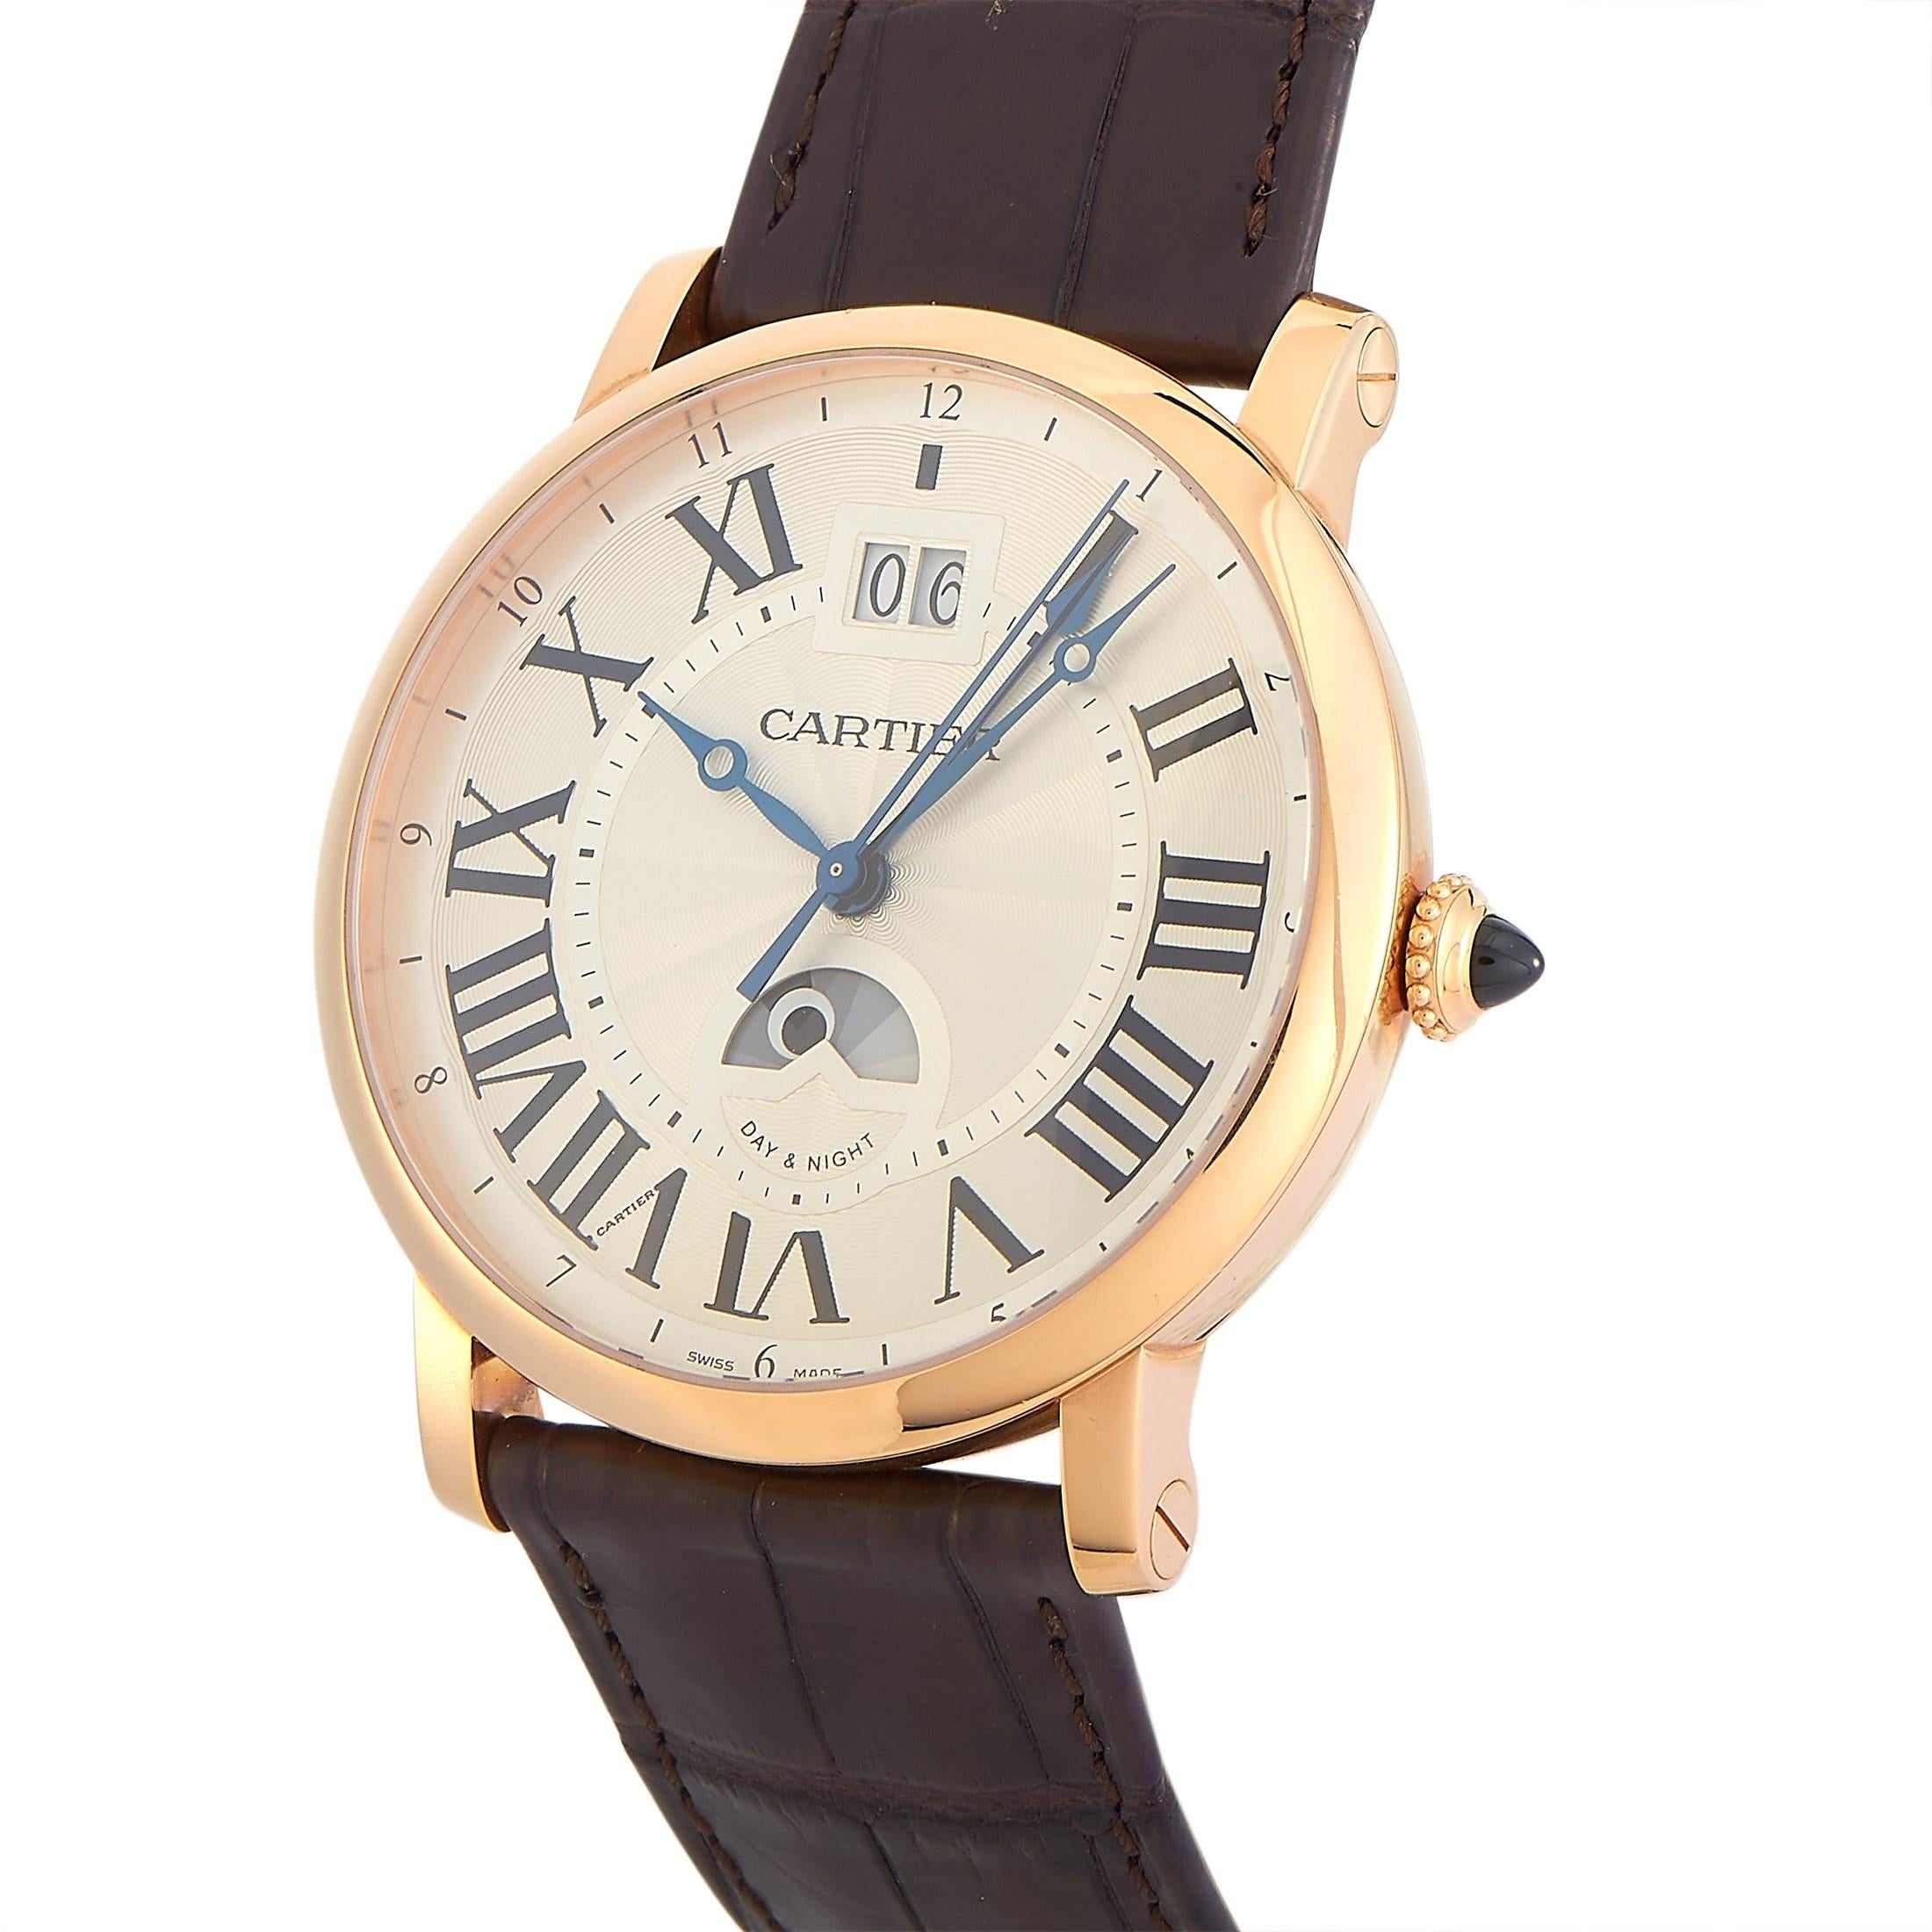 A highly desirable timepiece, the Cartier Rotonde de Cartier Big Date 18K Rose Gold Watch W1556220 is what you need to finish your outfit with a refined edge. This watch features a polished 42mm solid 18K rose gold case crafted in three parts. It